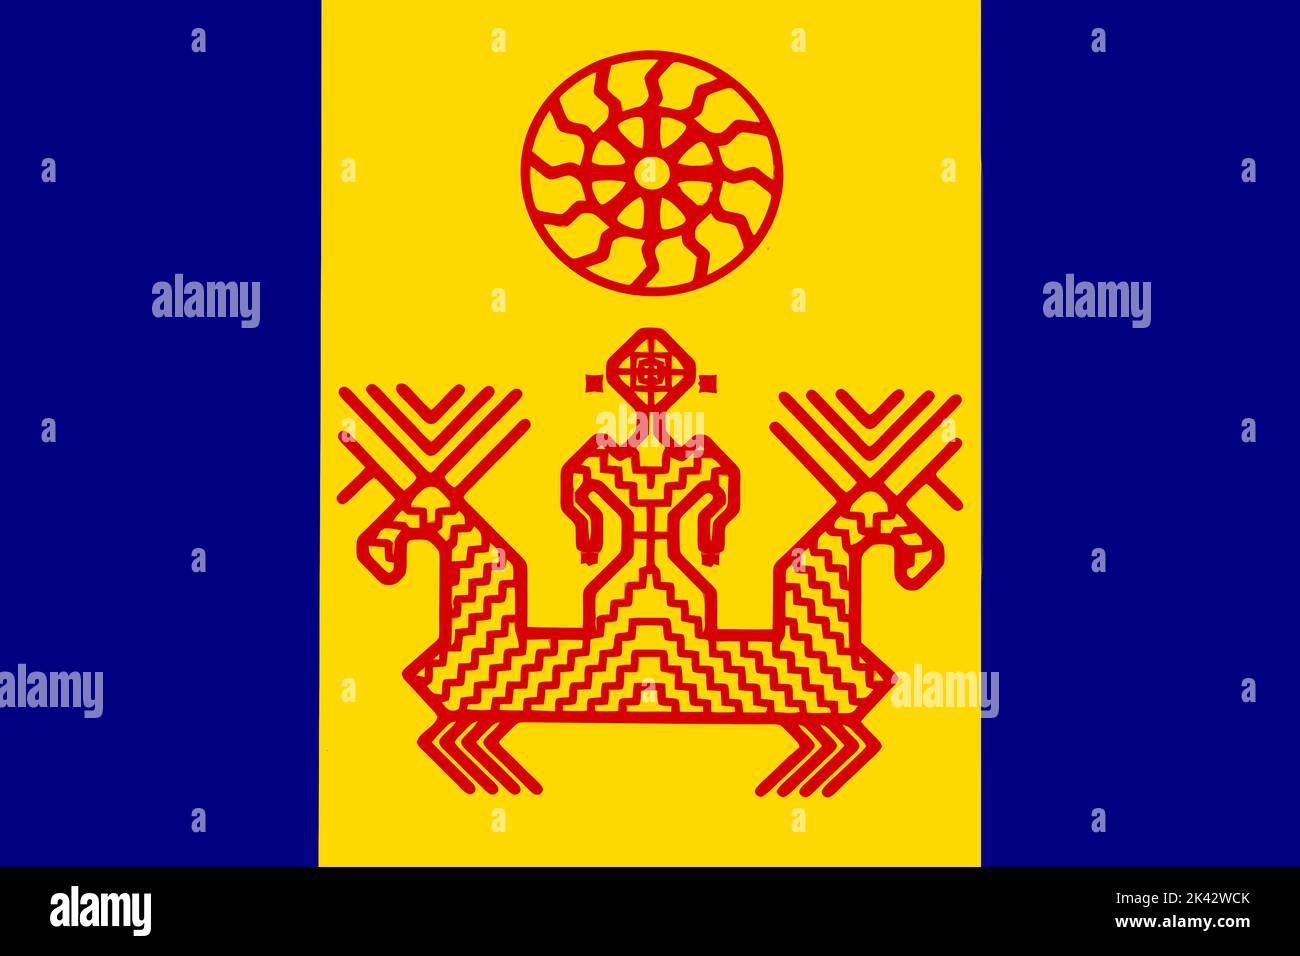 flag of Baltic Finns Izhorians. flag representing ethnic group or culture, regional authorities. no flagpole. Plane design, layout Stock Photo